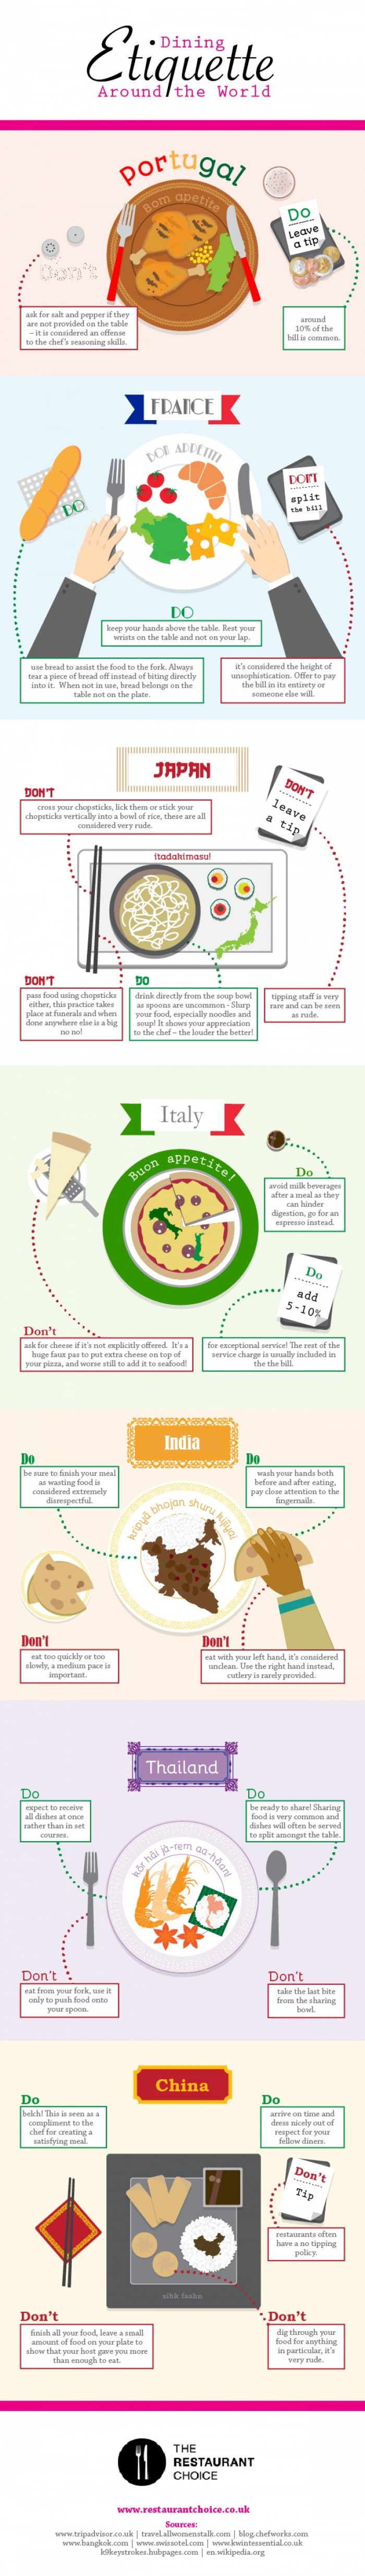 infographic-world-dining-etiquette